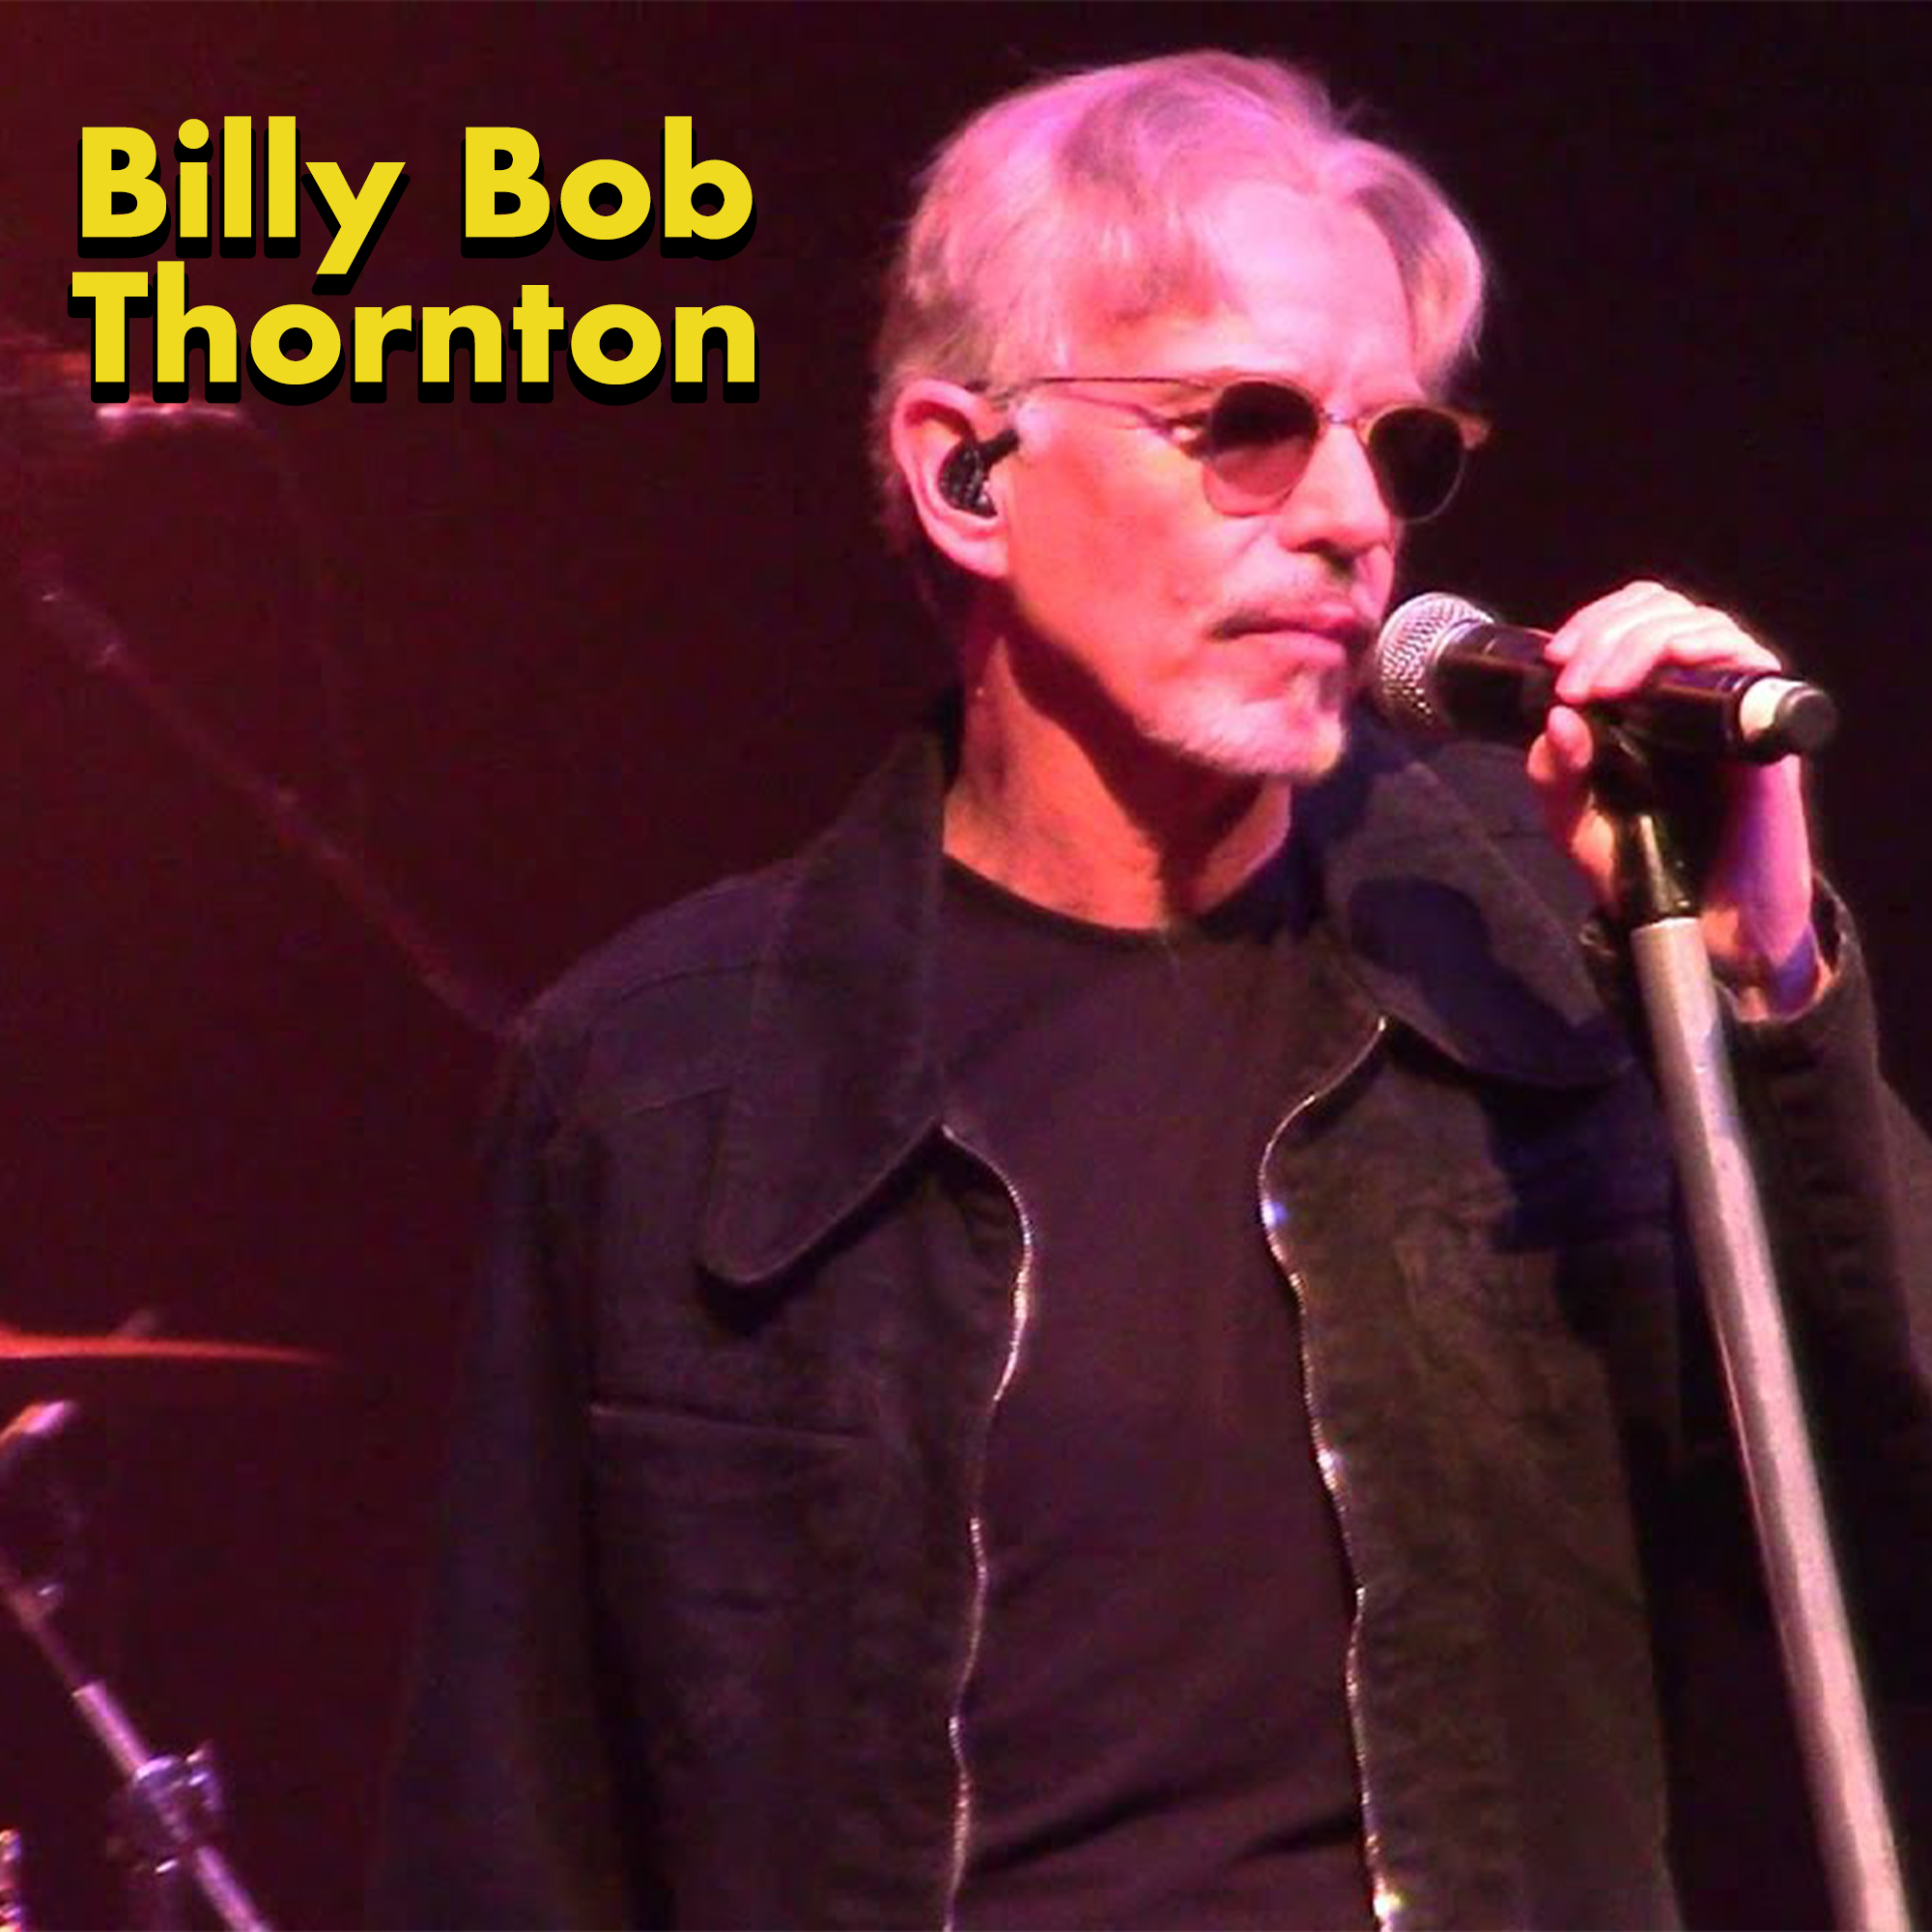 actors in bands - billy bob thornton band songs - Billy Bob Thornton